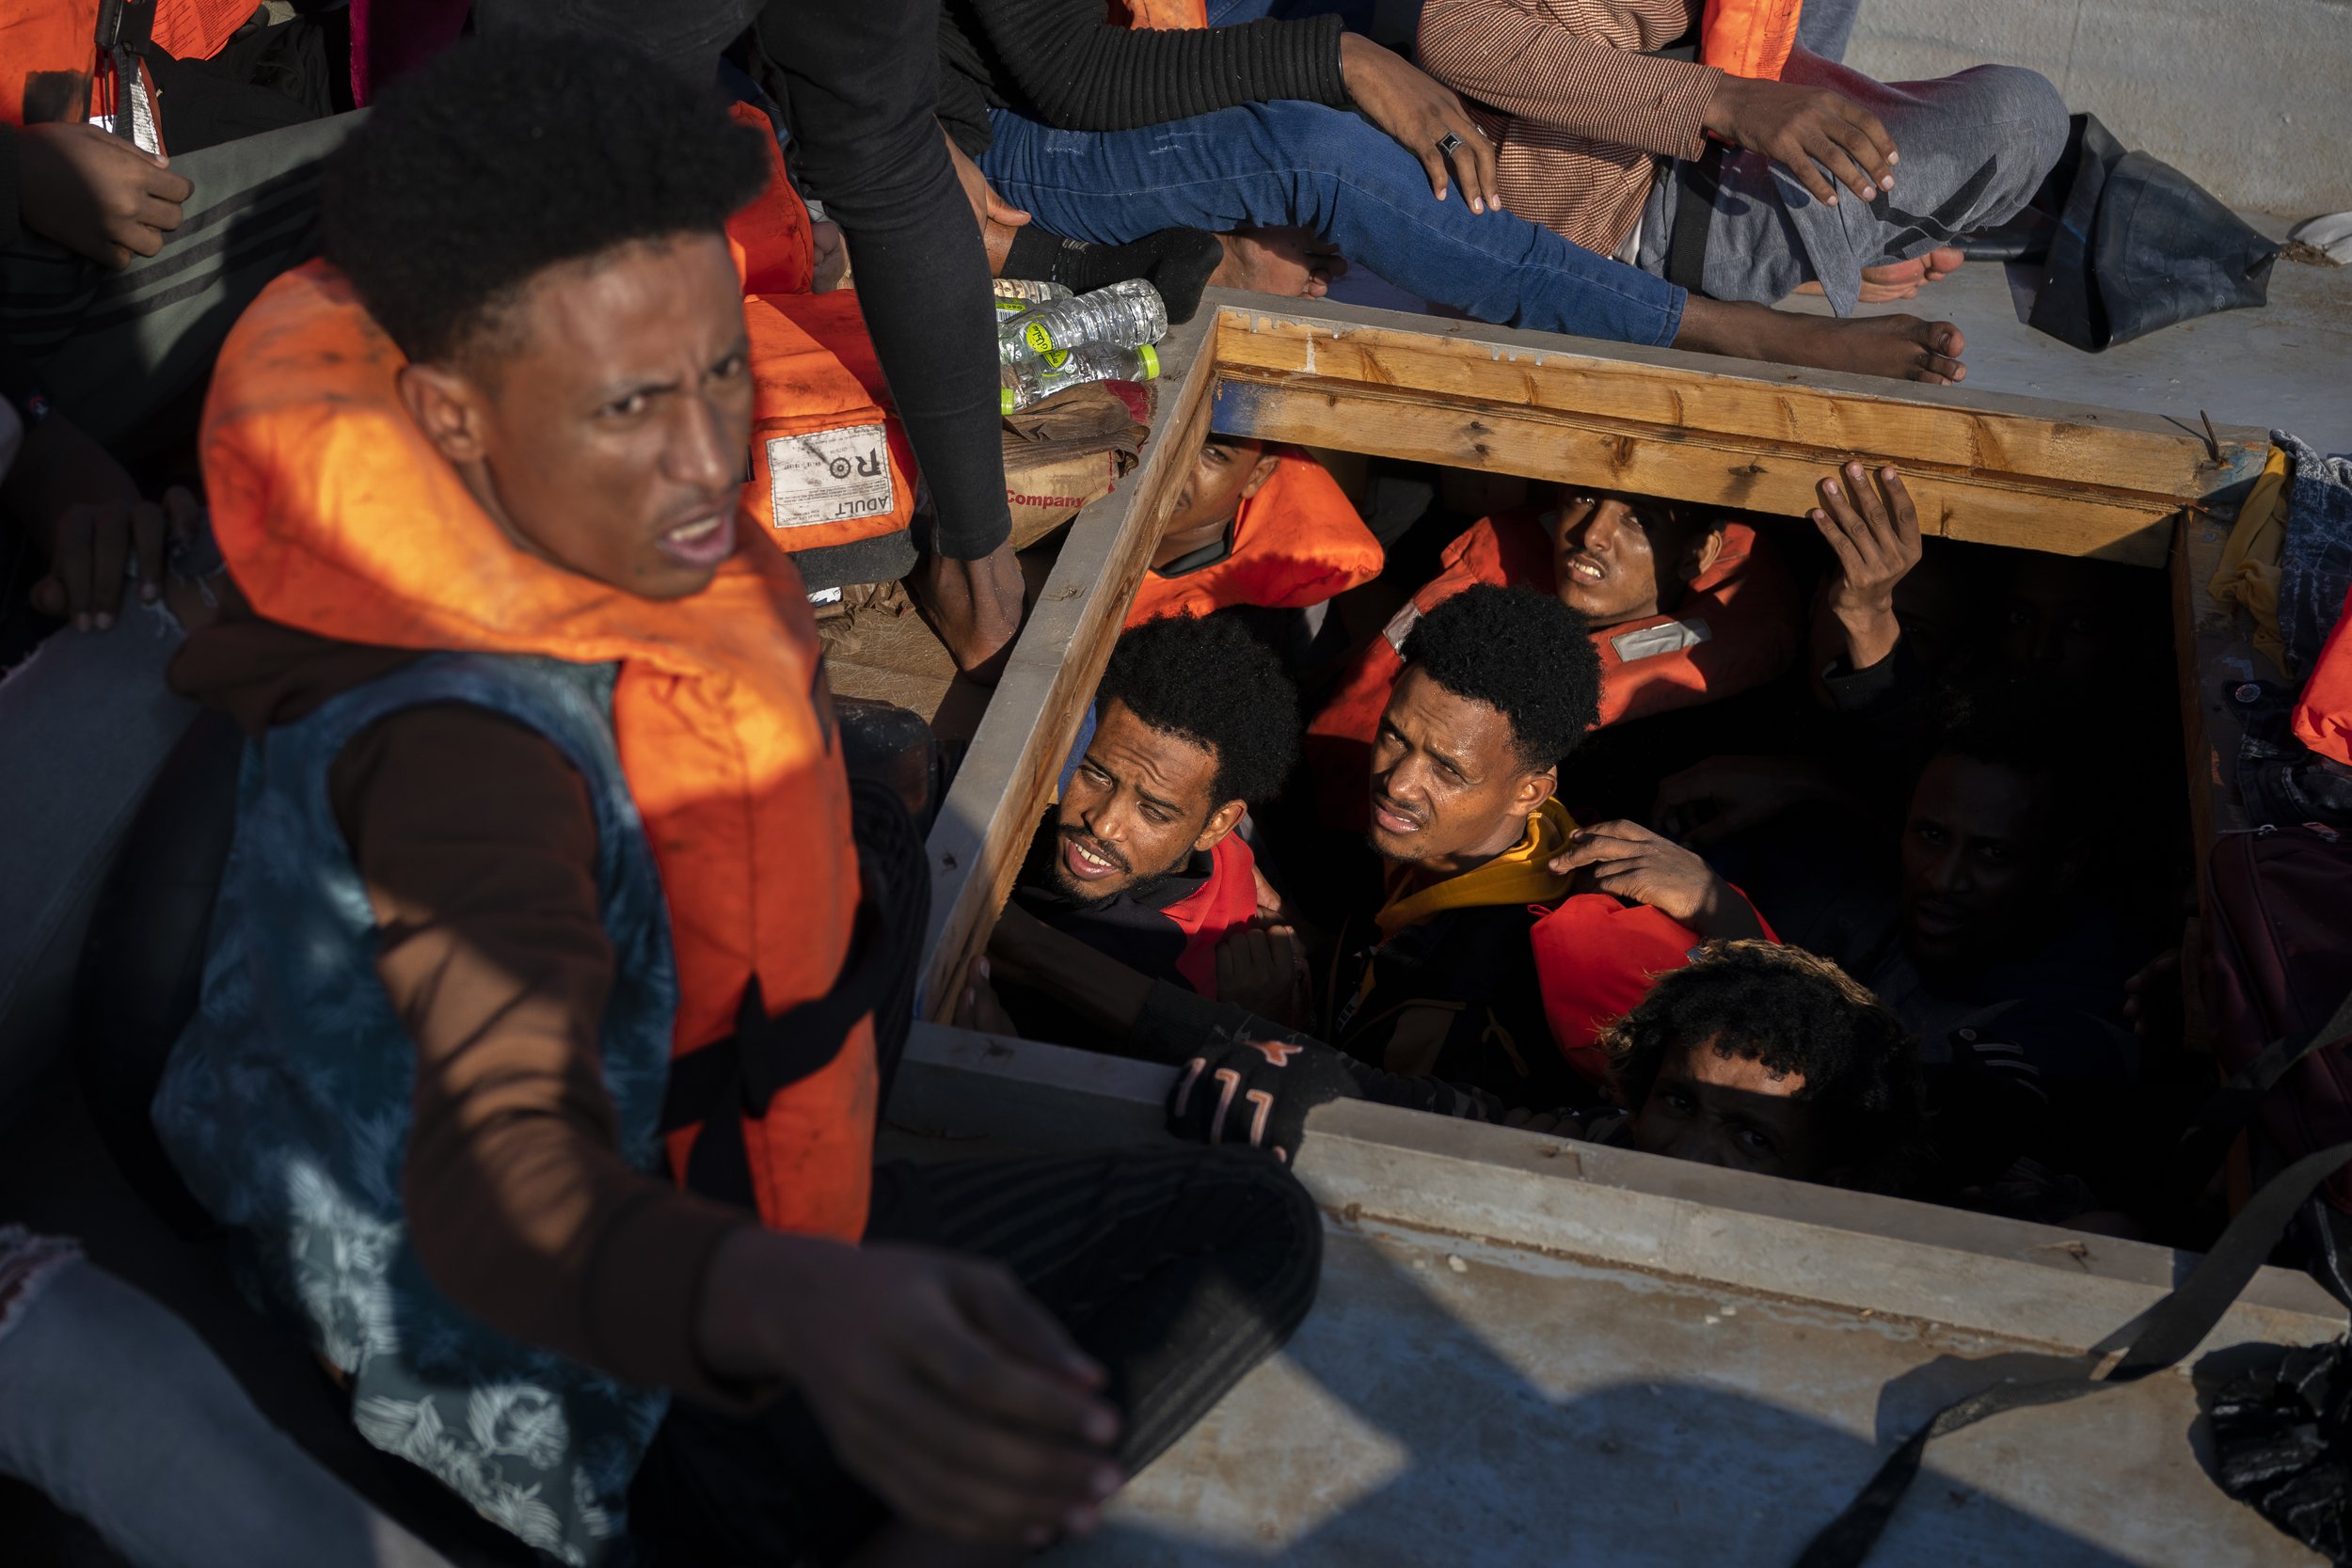  Migrants from Eritrea, Libya and Sudan are crowded in the hold of a wooden boat before being assisted by aid workers of the Spanish NGO Open Arms, in the Mediterranean sea, about 30 miles north of Libya on June 17, 2023. (AP Photo/Joan Mateu Parra) 